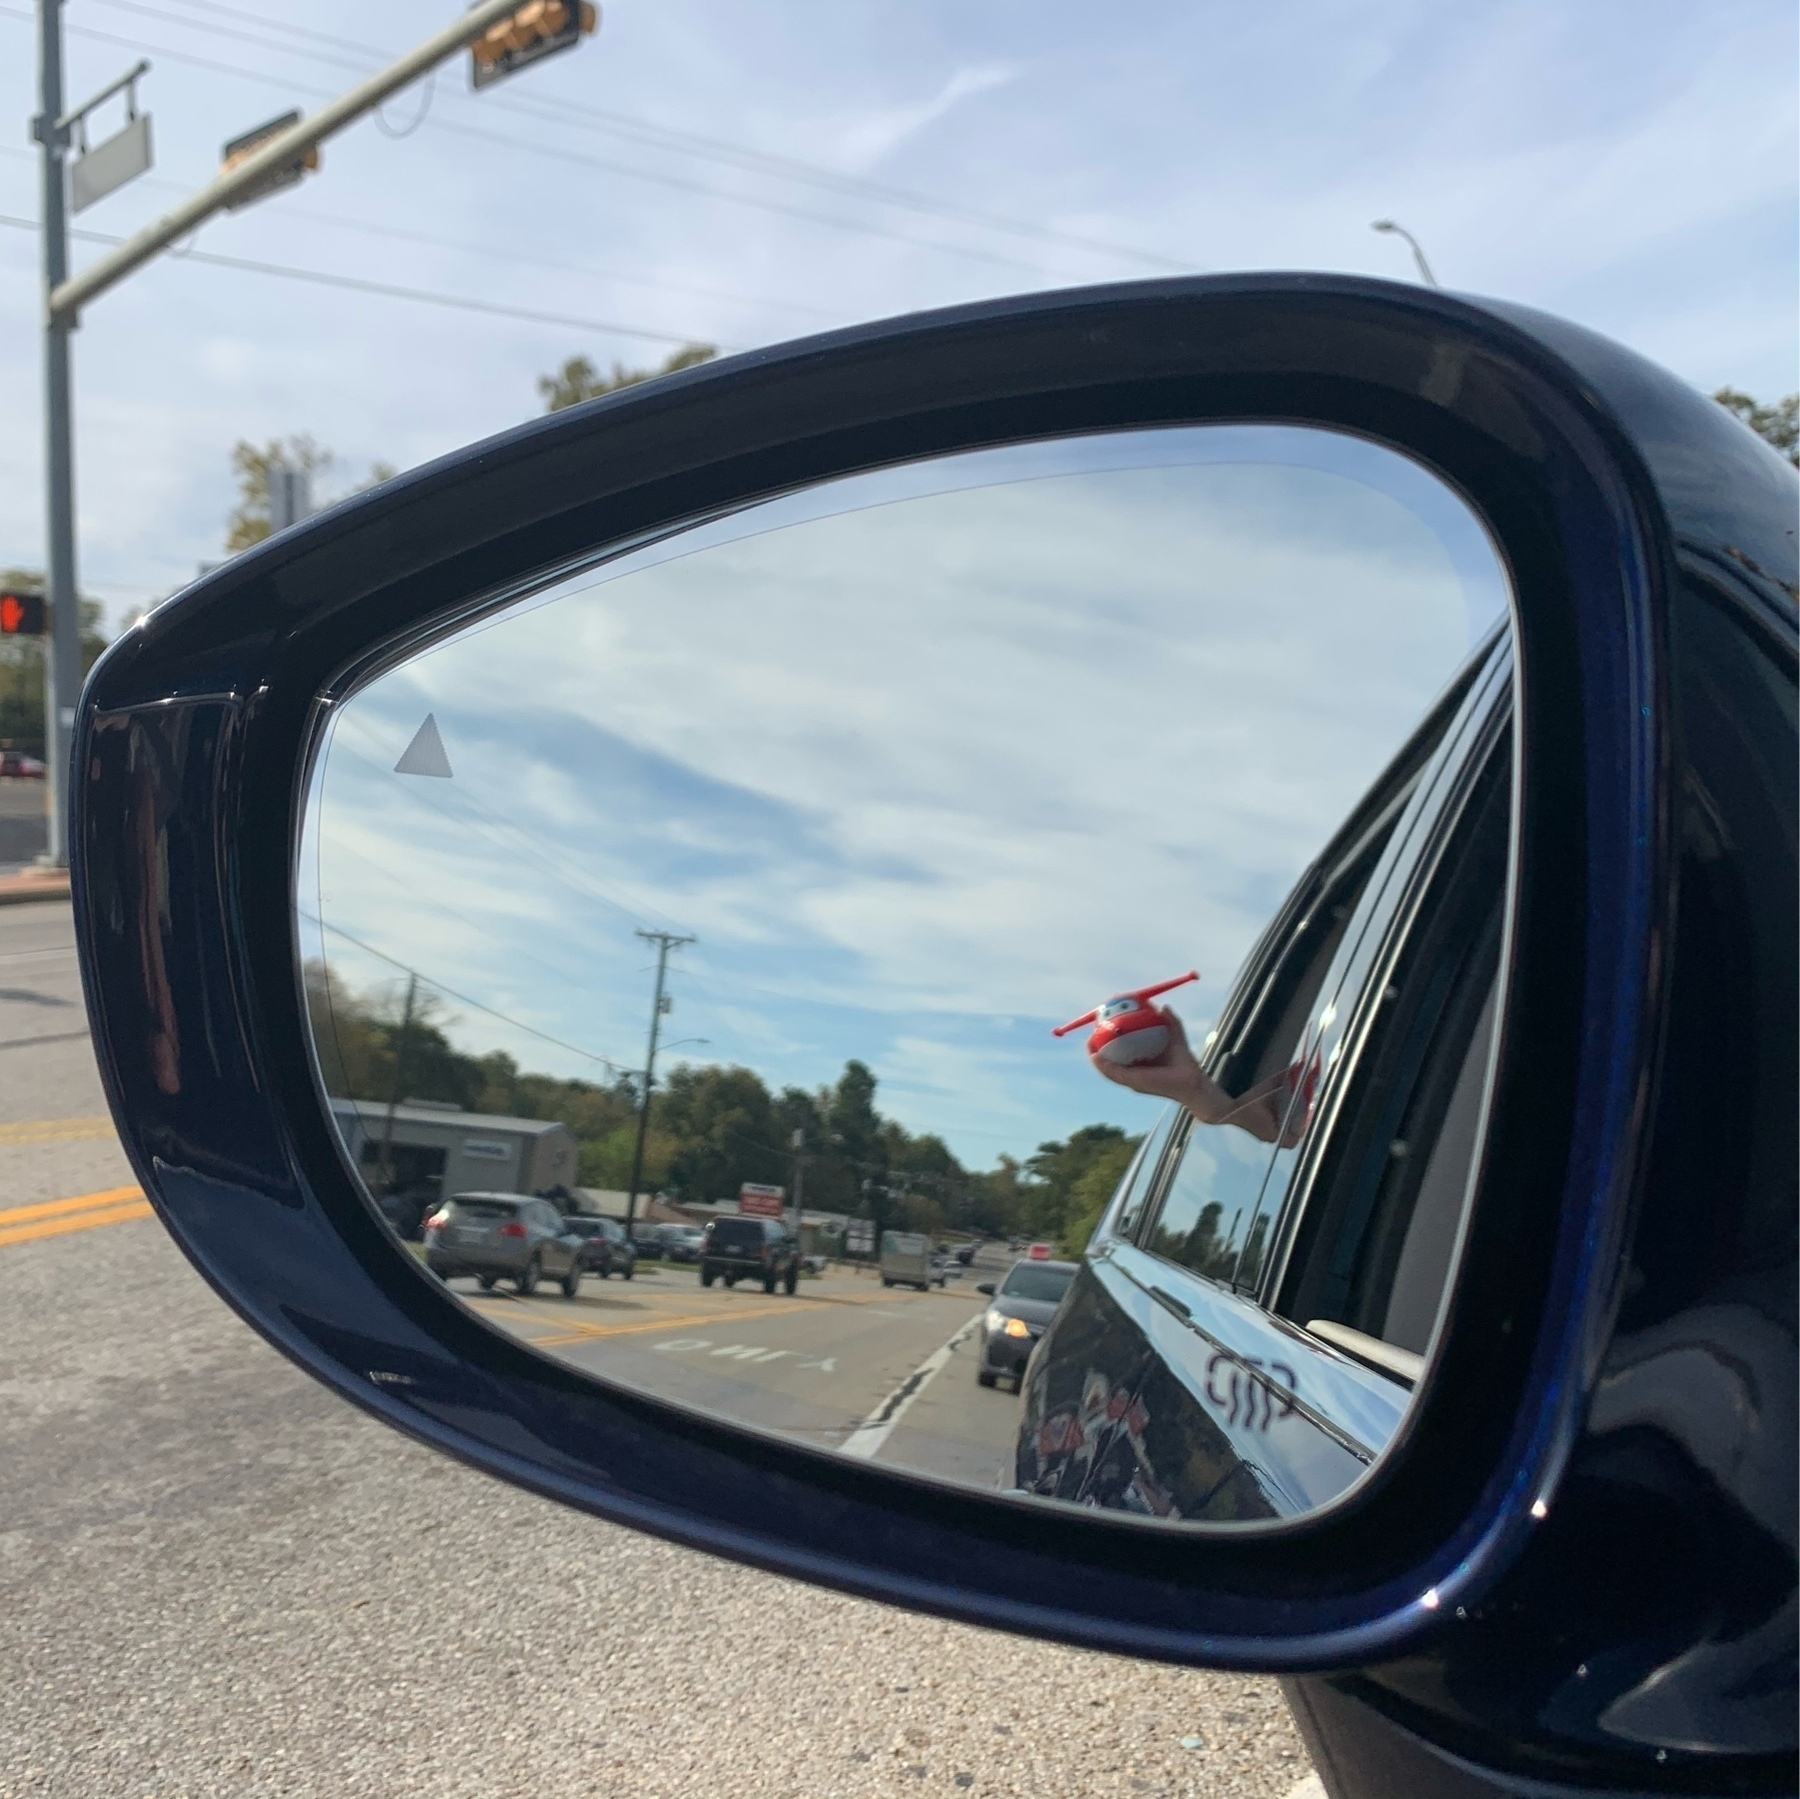 Toy out window in rearview mirror